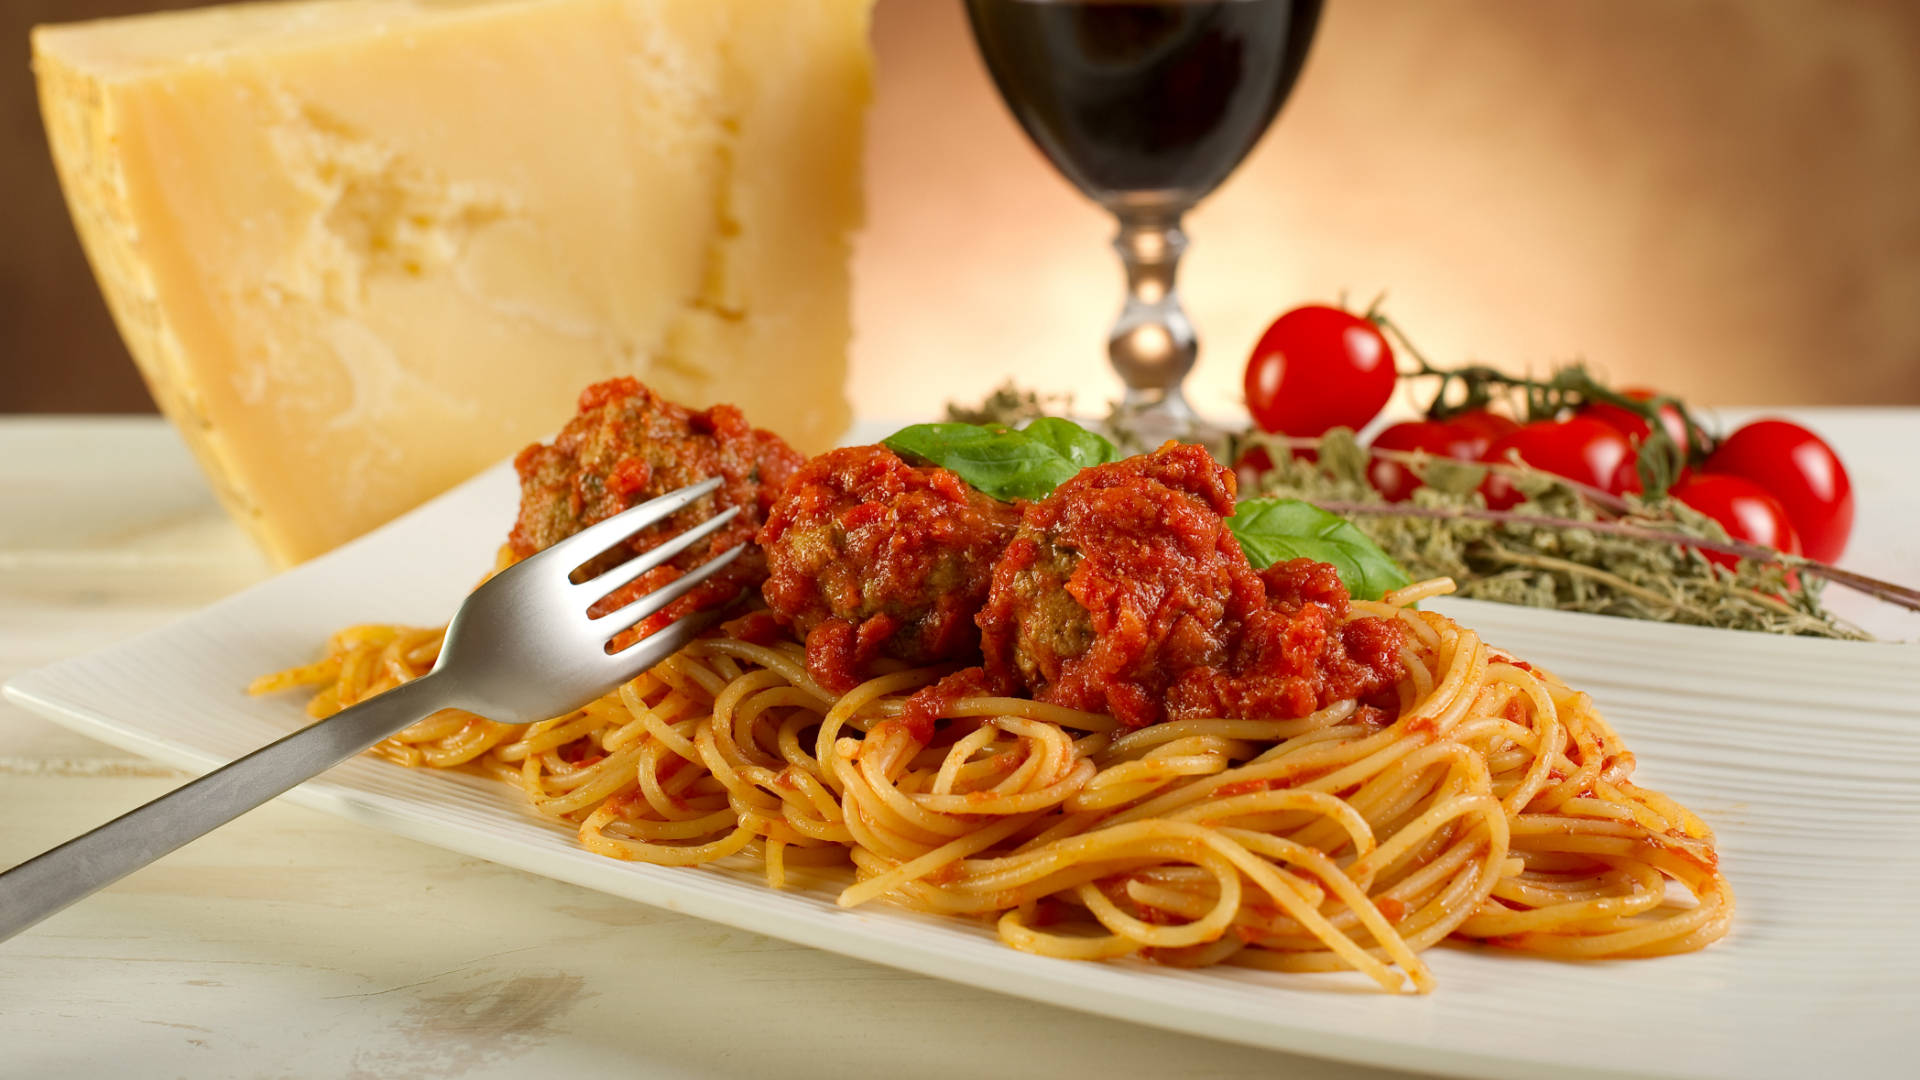 Hearty Italian Dinner: Pasta With Meatballs Background